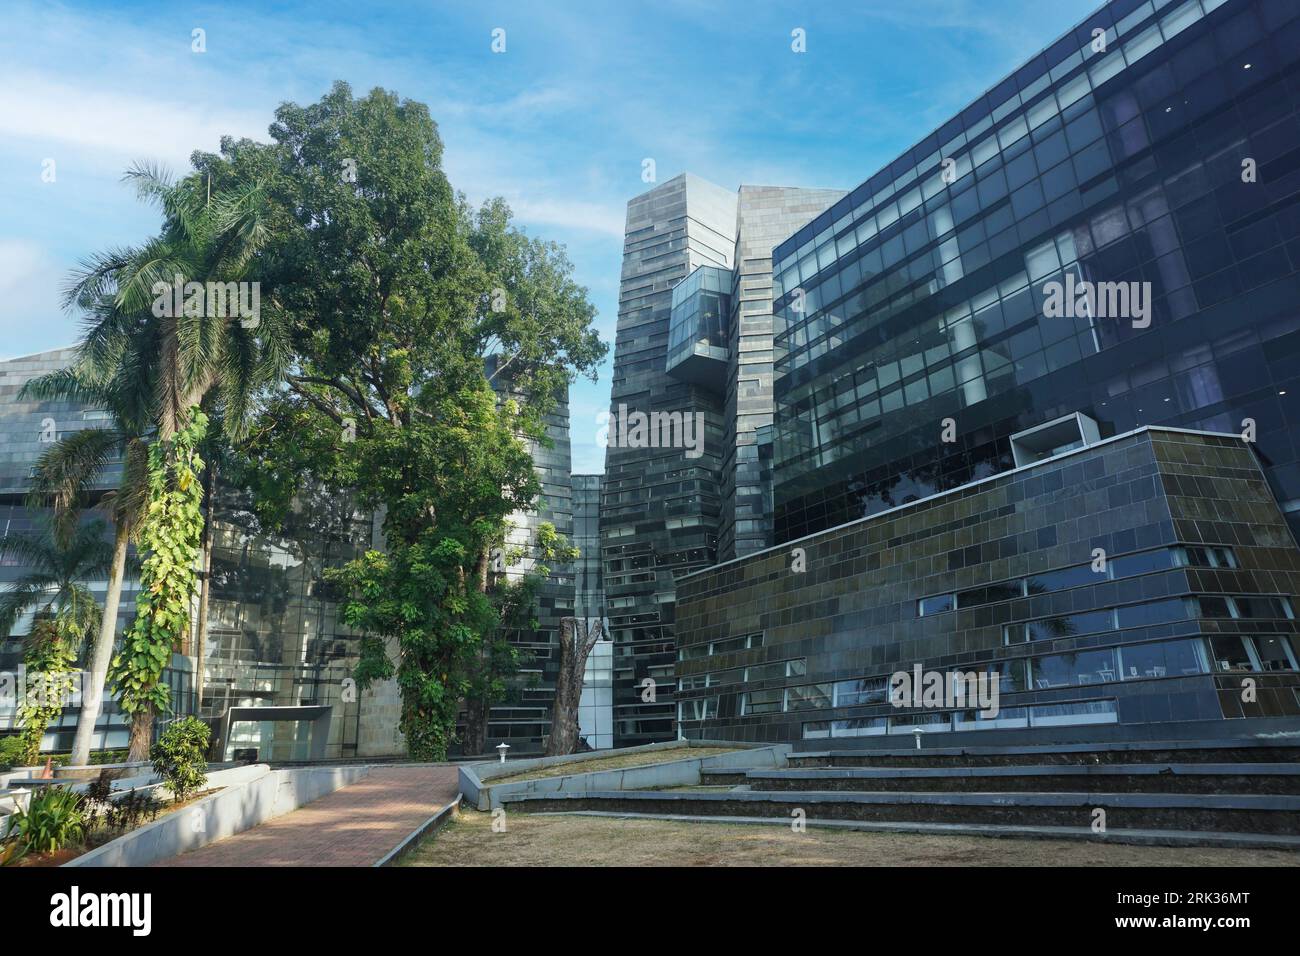 Modern eco-friendly glass architecture and greens against blue sky. Stock Photo